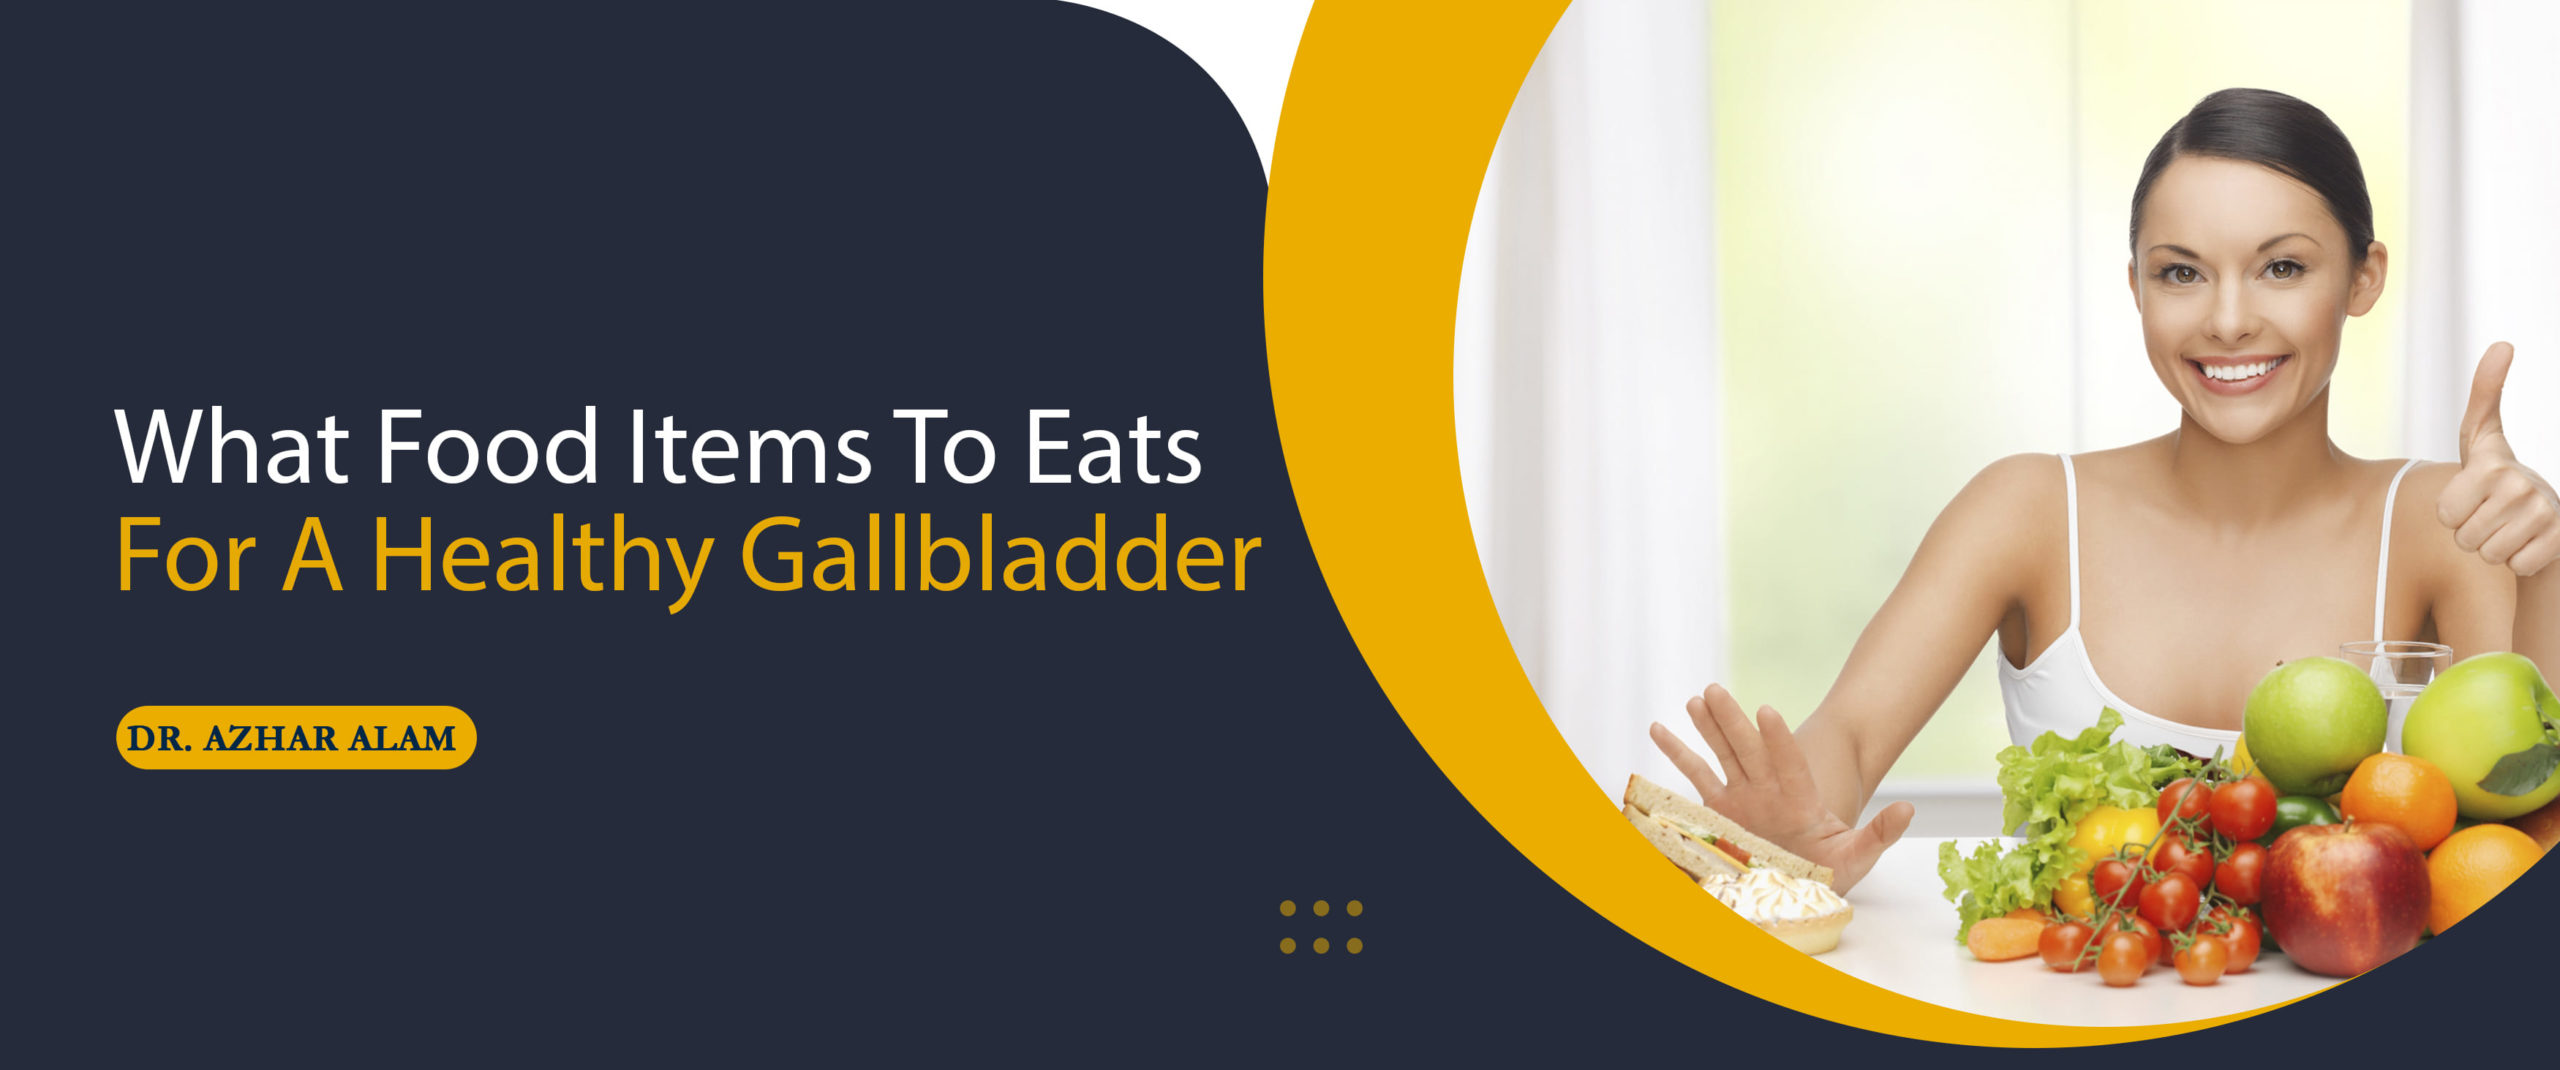 What Food Items To Eats For A Healthy Gallbladder